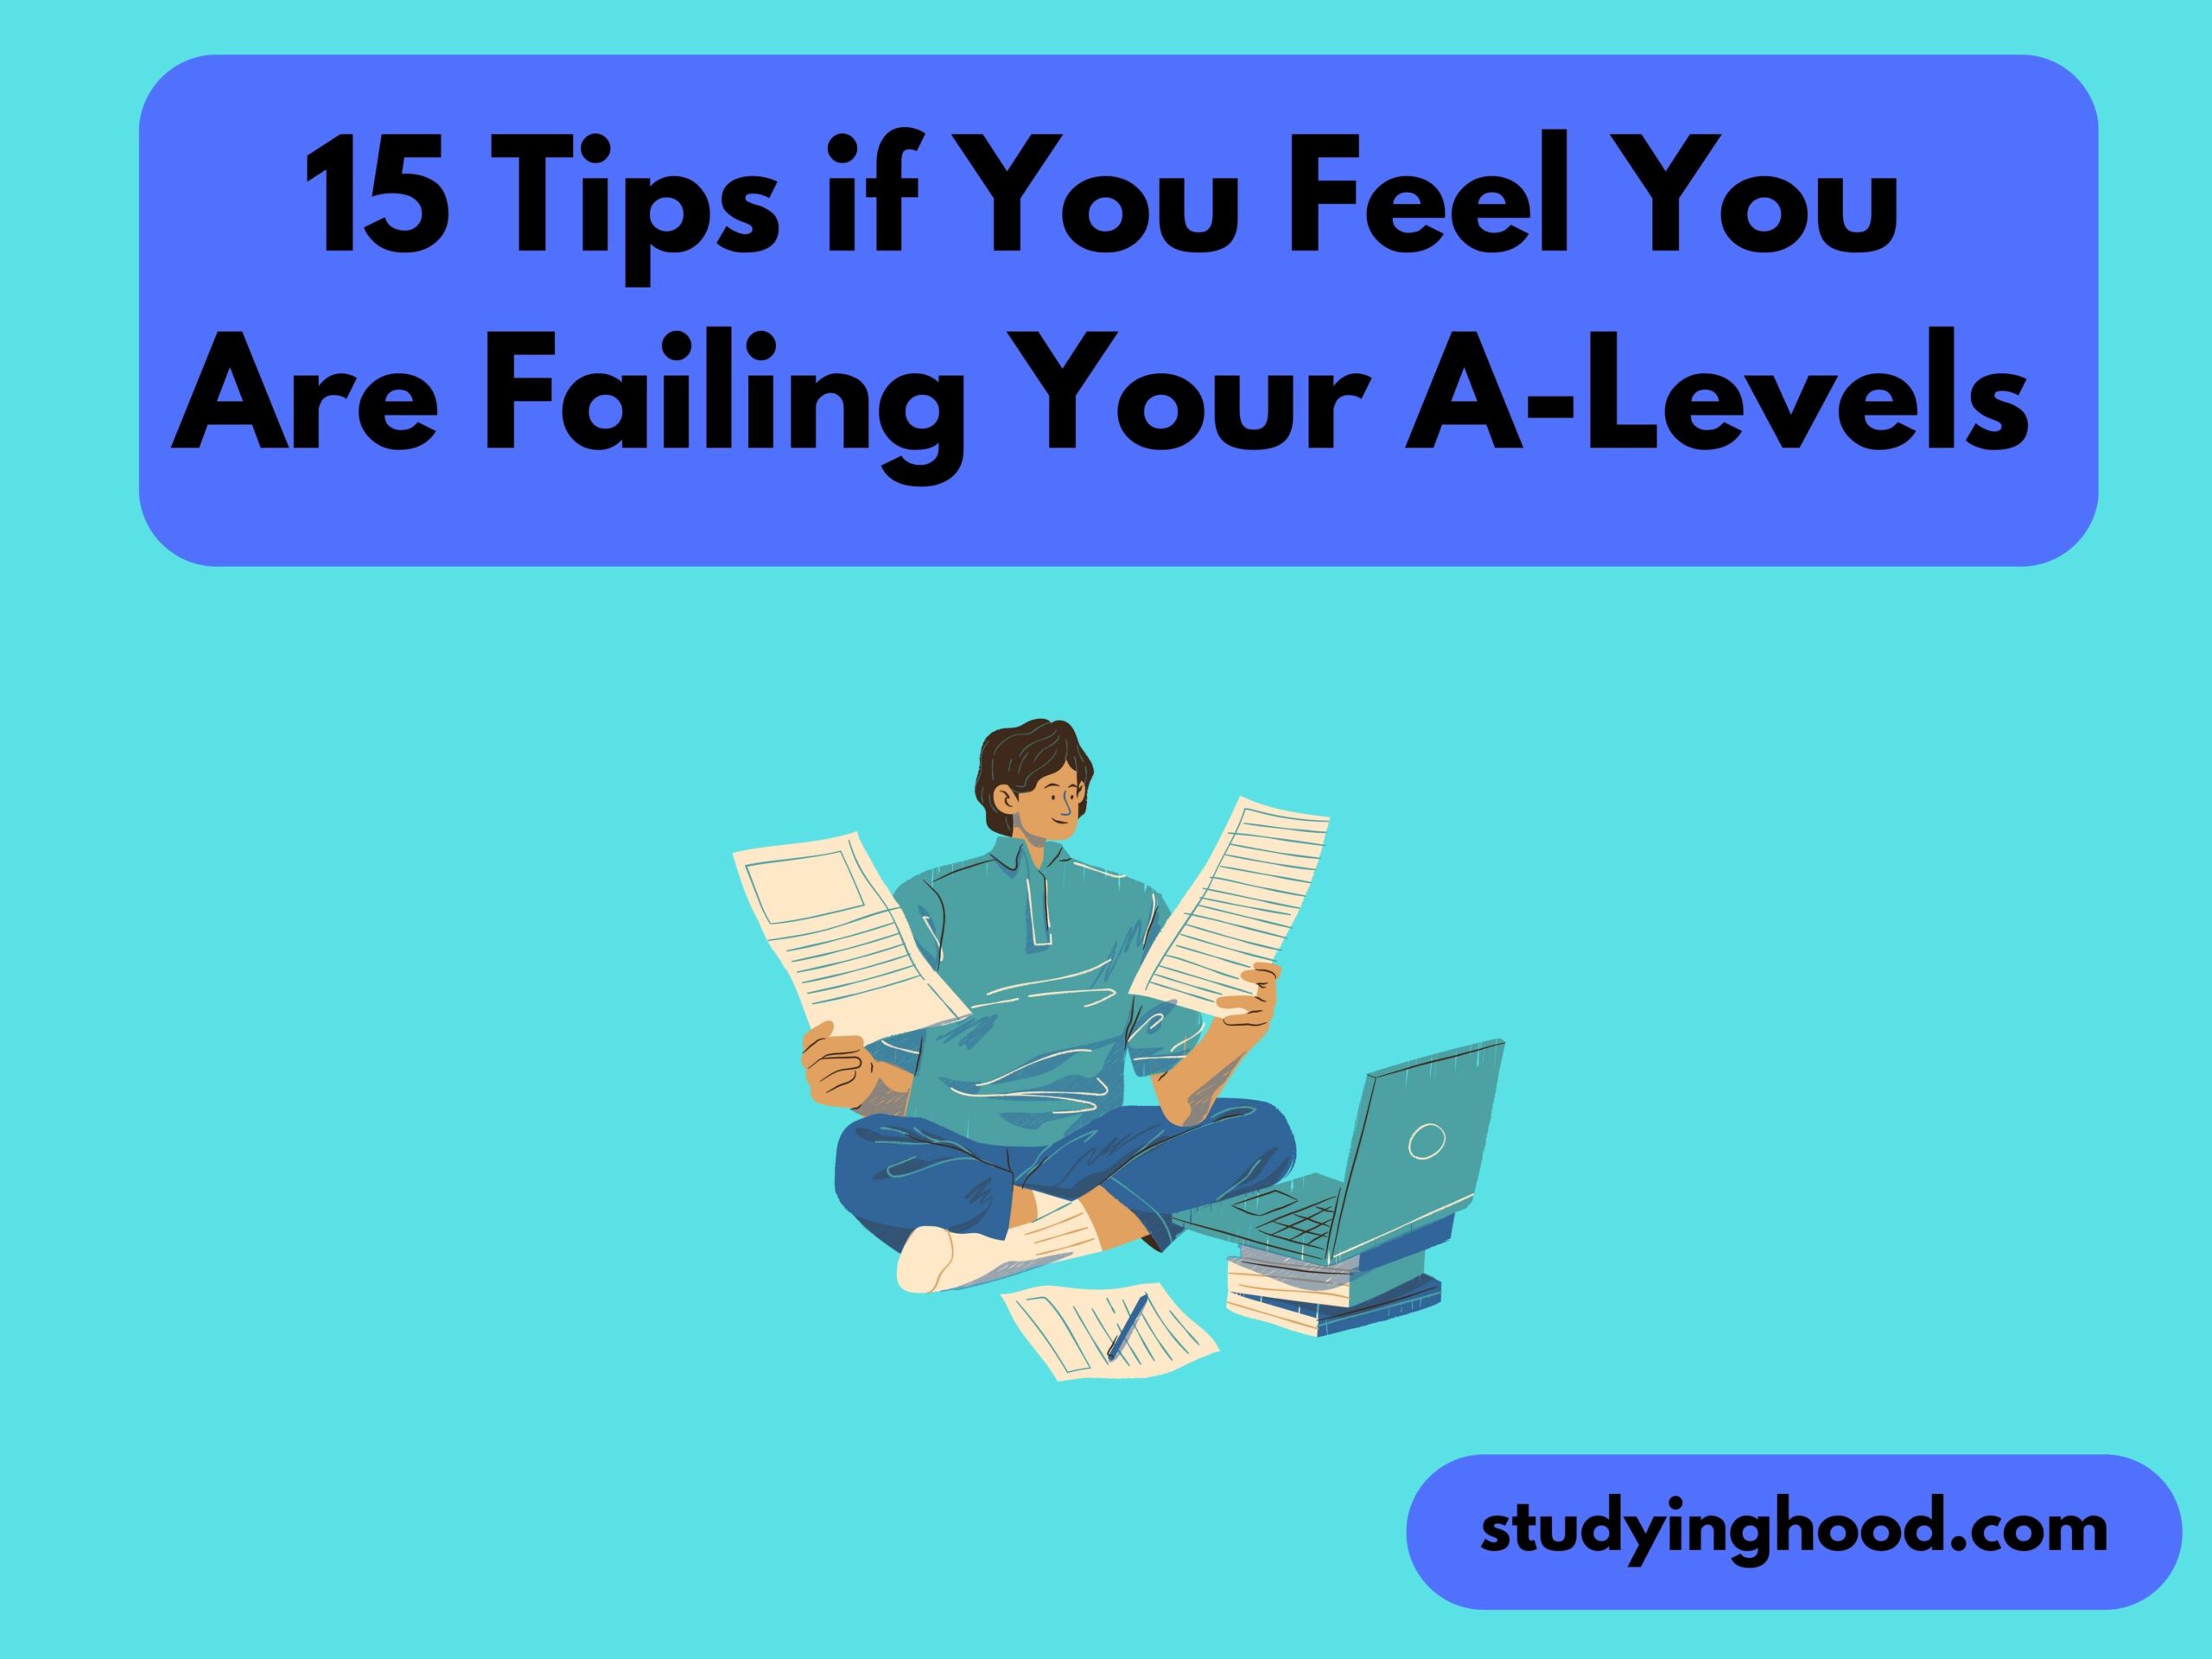 15 Tips if You Feel You Are Failing Your A-Levels